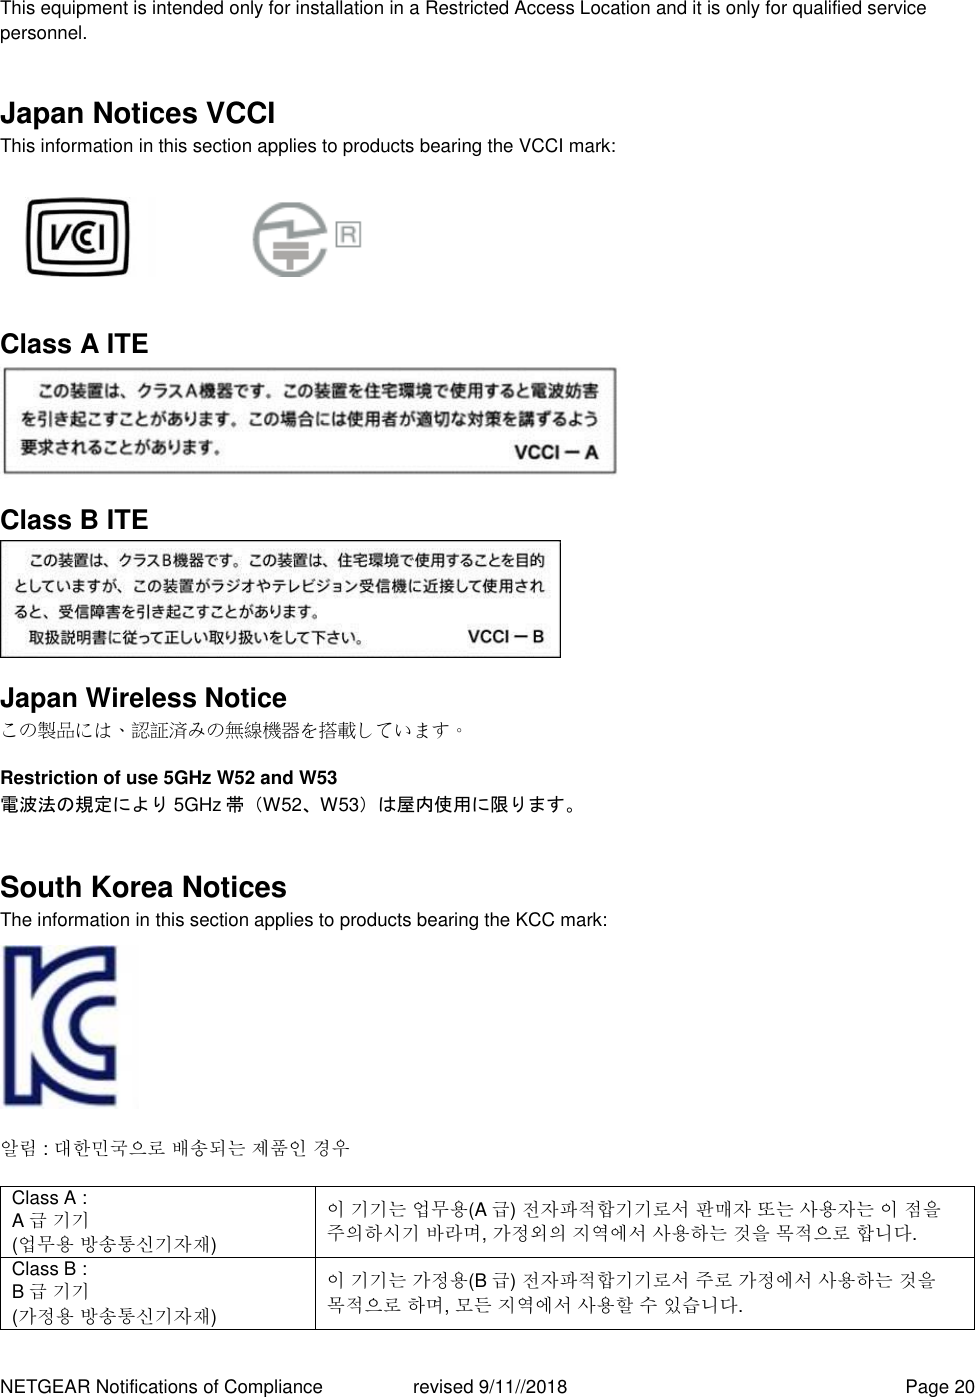 NETGEAR Notifications of Compliance    revised 9/11//2018  Page 20 This equipment is intended only for installation in a Restricted Access Location and it is only for qualified service personnel. Japan Notices VCCI This information in this section applies to products bearing the VCCI mark:    Class A ITE  Class B ITE  Japan Wireless Notice この製品には、認証済みの無線機器を搭載しています。 Restriction of use 5GHz W52 and W53 電波法の規定により 5GHz 帯（W52、W53）は屋内使用に限ります。 South Korea Notices  The information in this section applies to products bearing the KCC mark:     알림 : 대한민국으로 배송되는 제품인 경우 Class A :  A급 기기 (업무용 방송통신기자재) 이 기기는 업무용(A 급) 전자파적합기기로서 판매자 또는 사용자는 이 점을 주의하시기 바라며, 가정외의 지역에서 사용하는 것을 목적으로 합니다. Class B :  B급 기기 (가정용 방송통신기자재) 이 기기는 가정용(B 급) 전자파적합기기로서 주로 가정에서 사용하는 것을 목적으로 하며, 모든 지역에서 사용할 수 있습니다. 